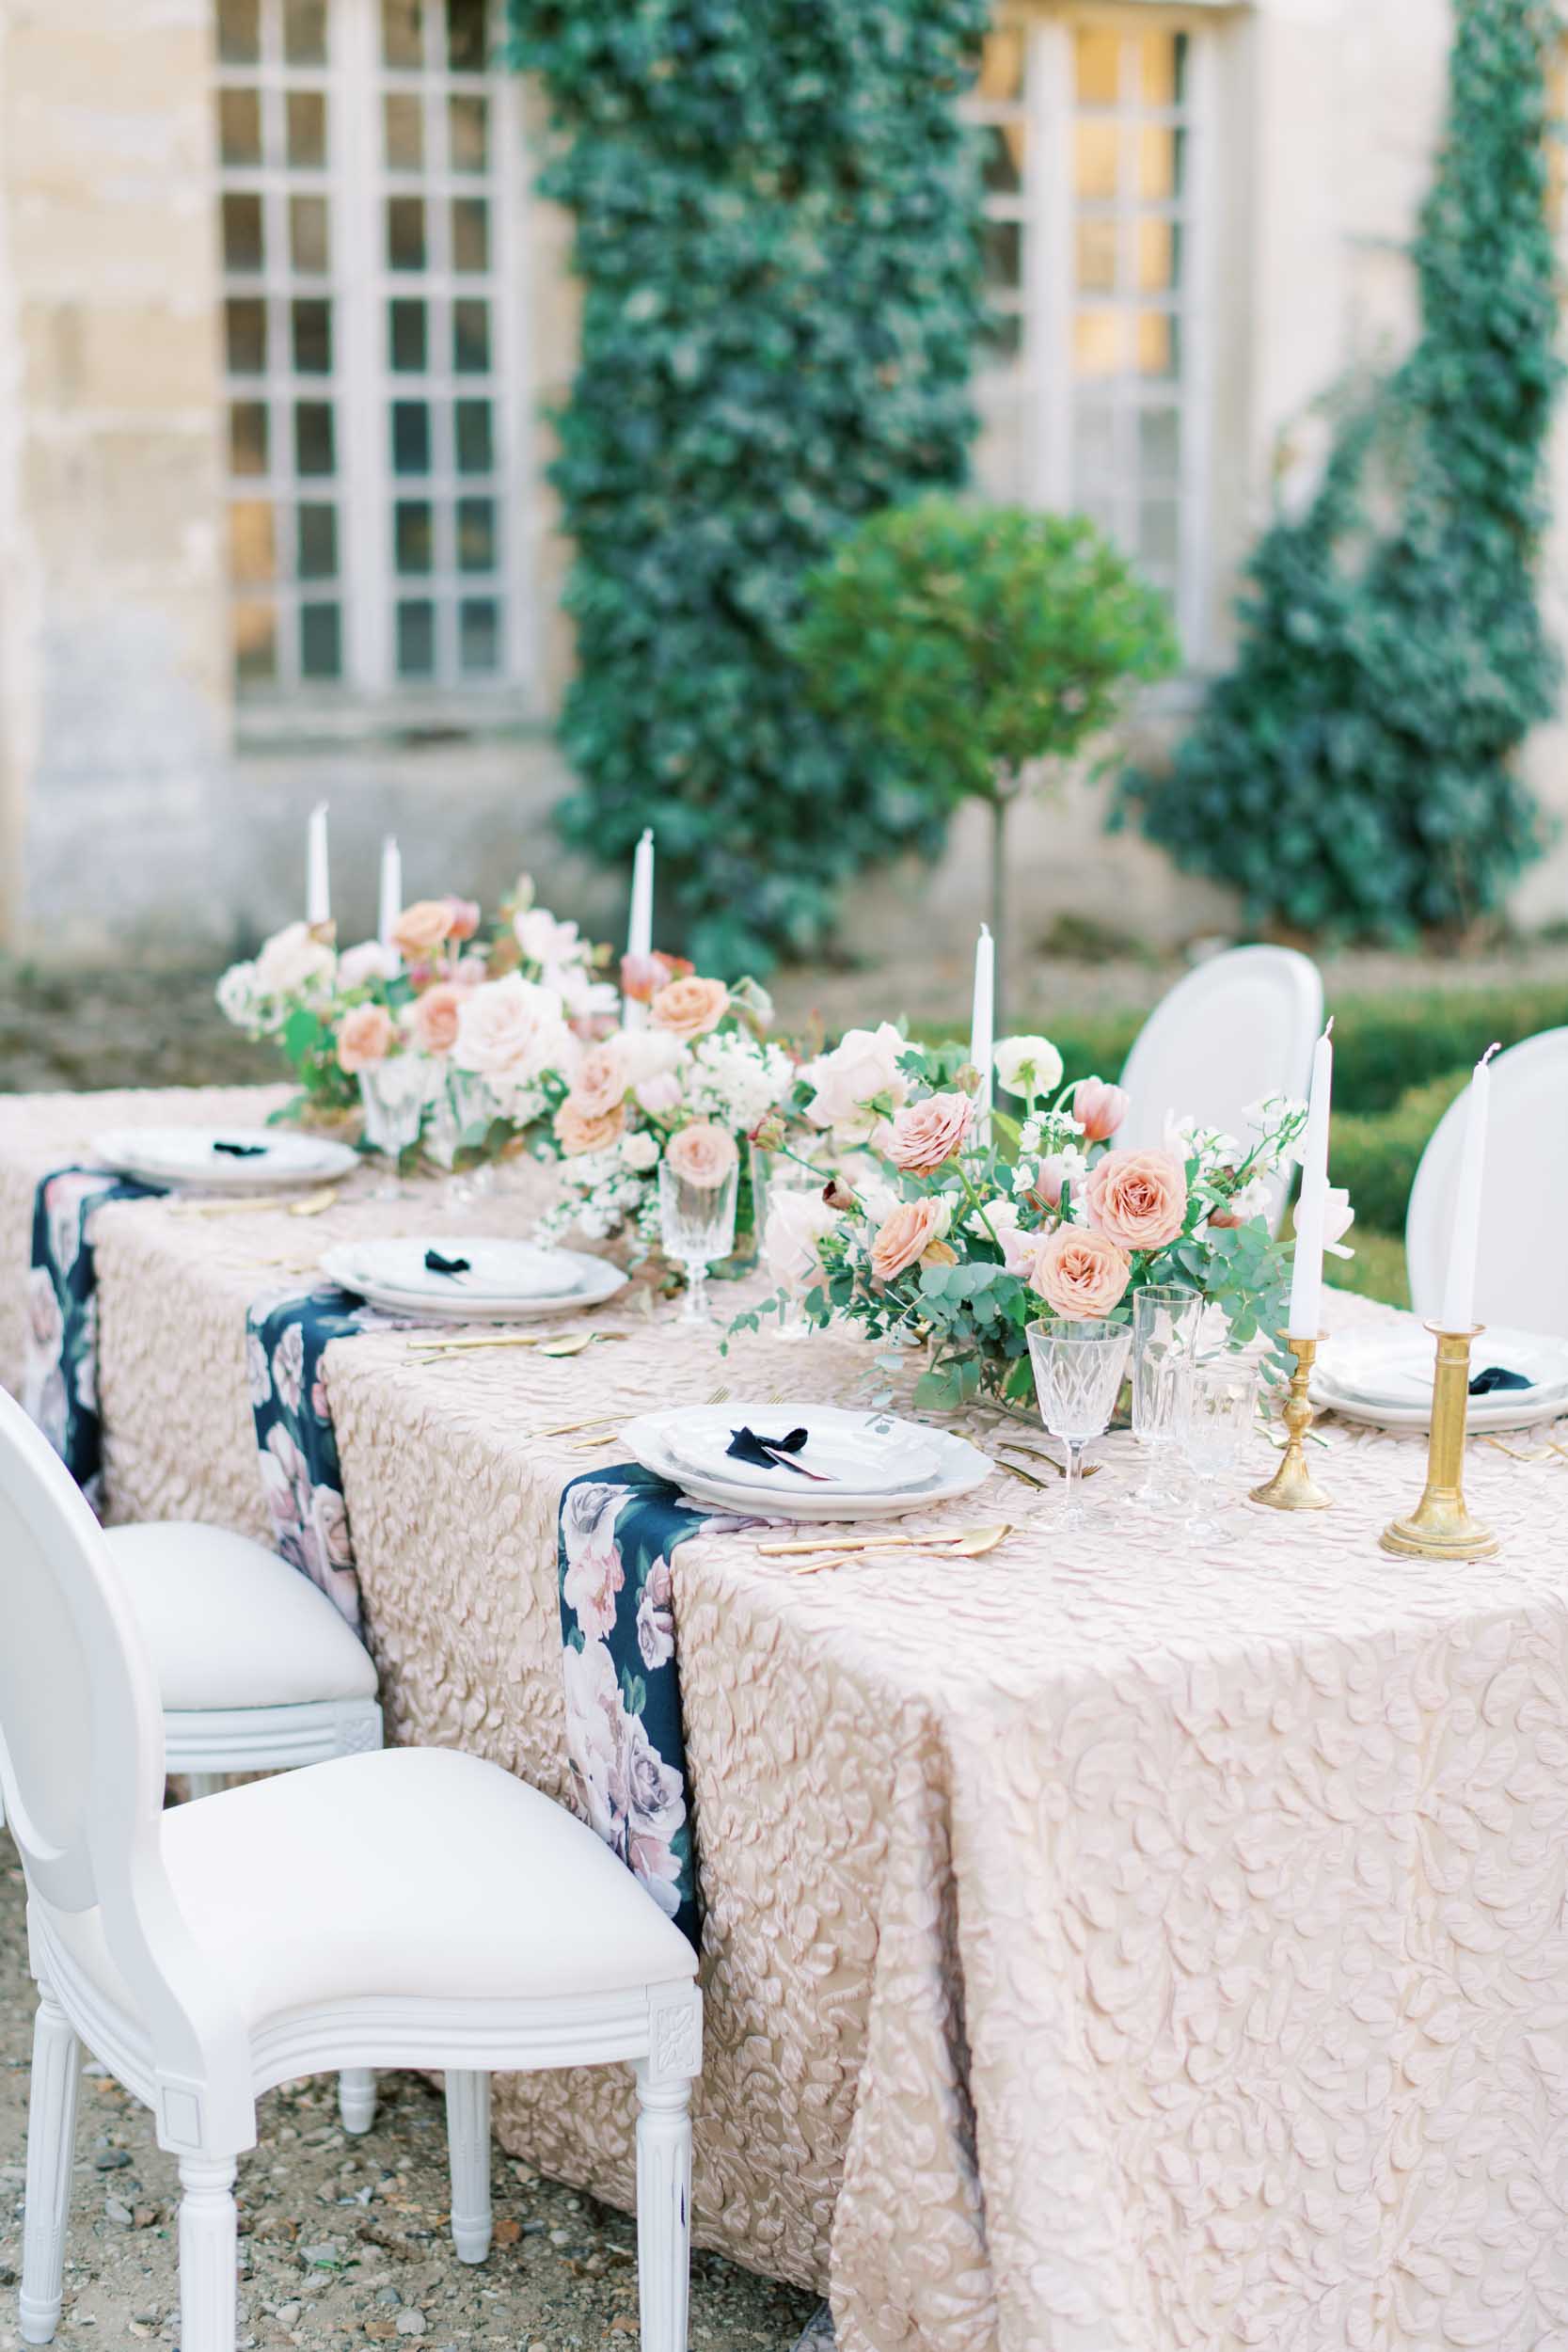 Paris chateau wedding table setting outdoors